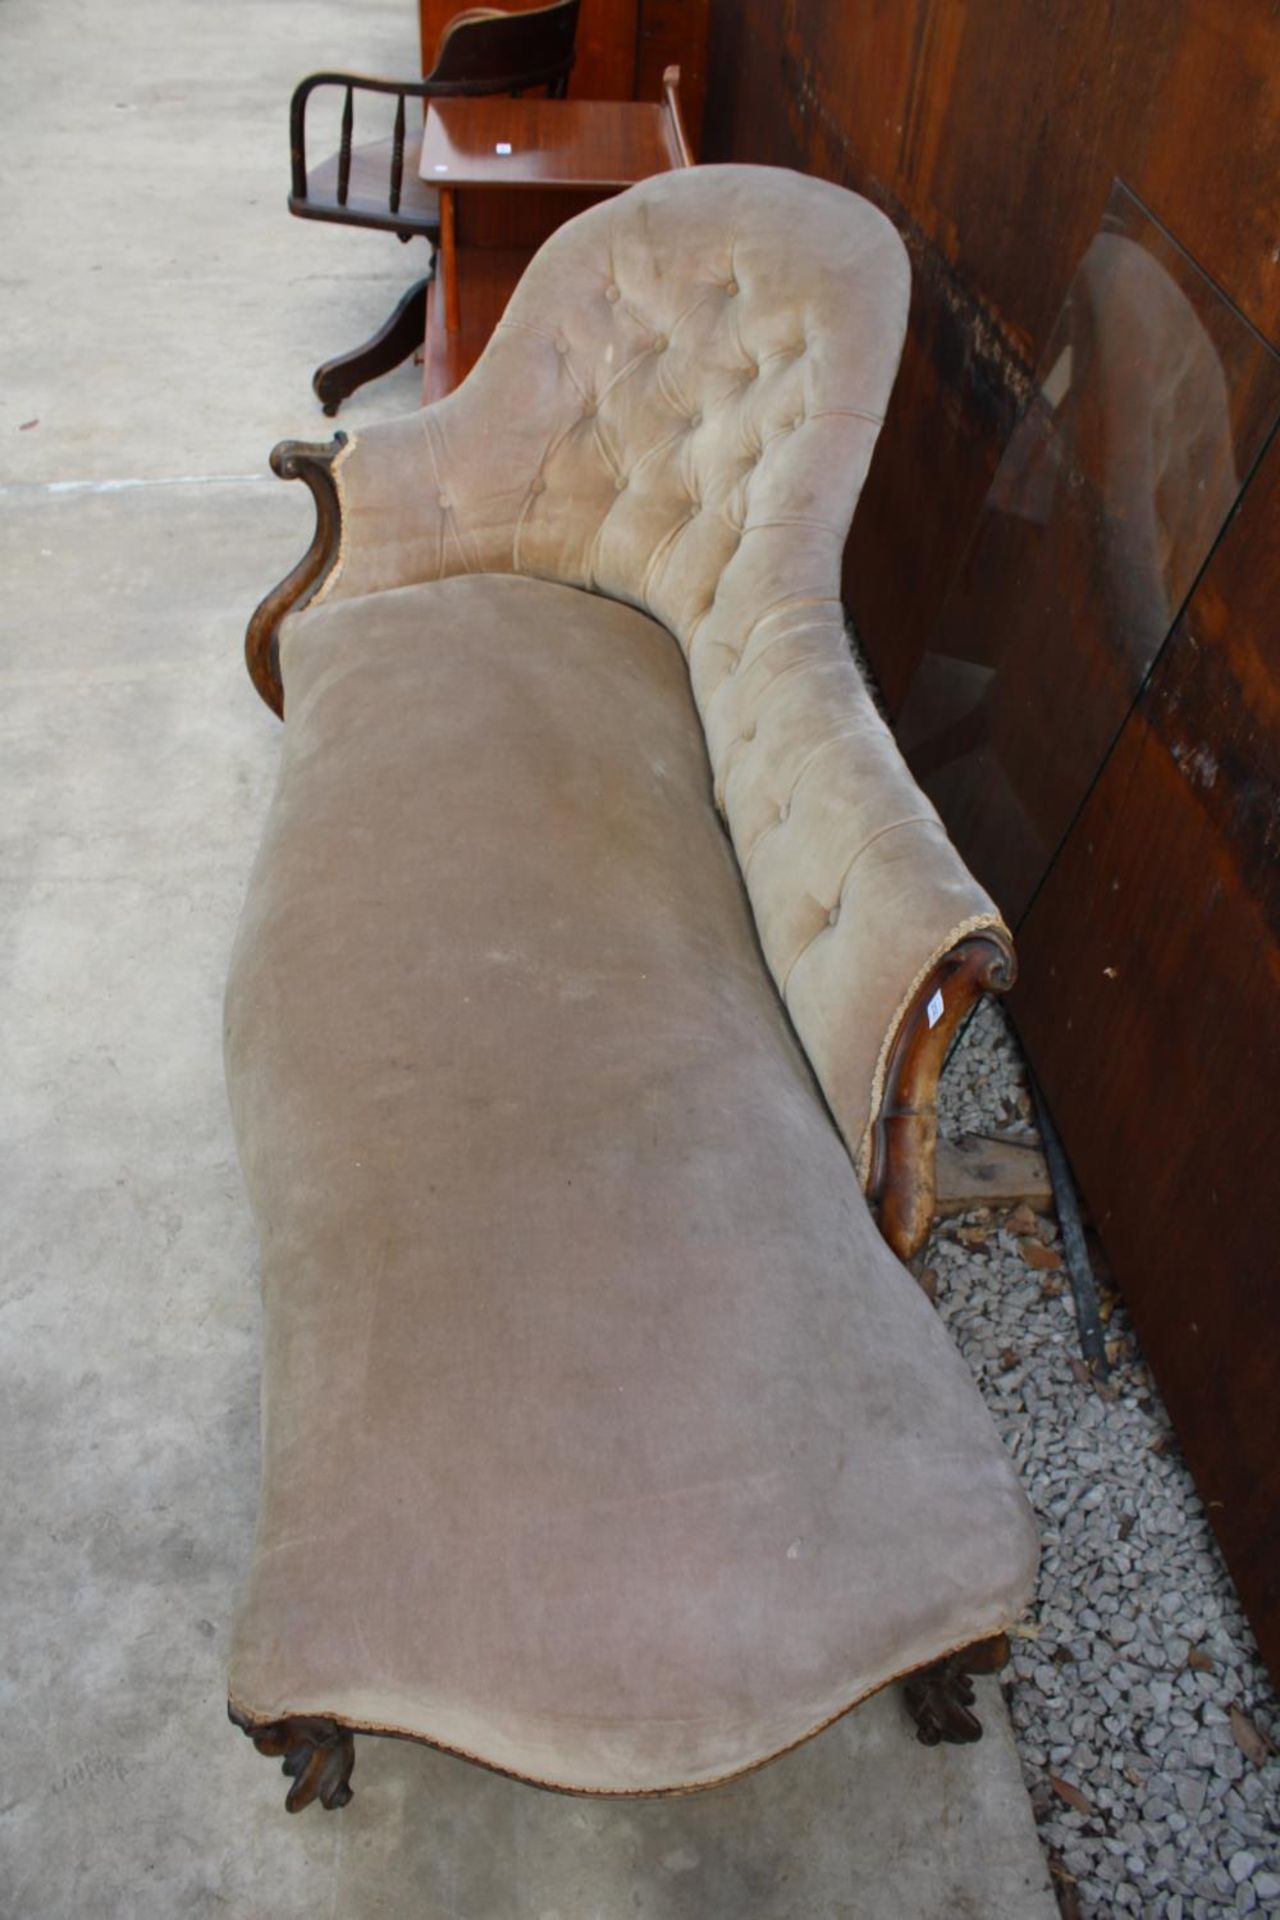 A VICTORIAN MAHOGANY CHAISE LONGUE WITH SCROLL ARM AND LEGS - Image 3 of 3